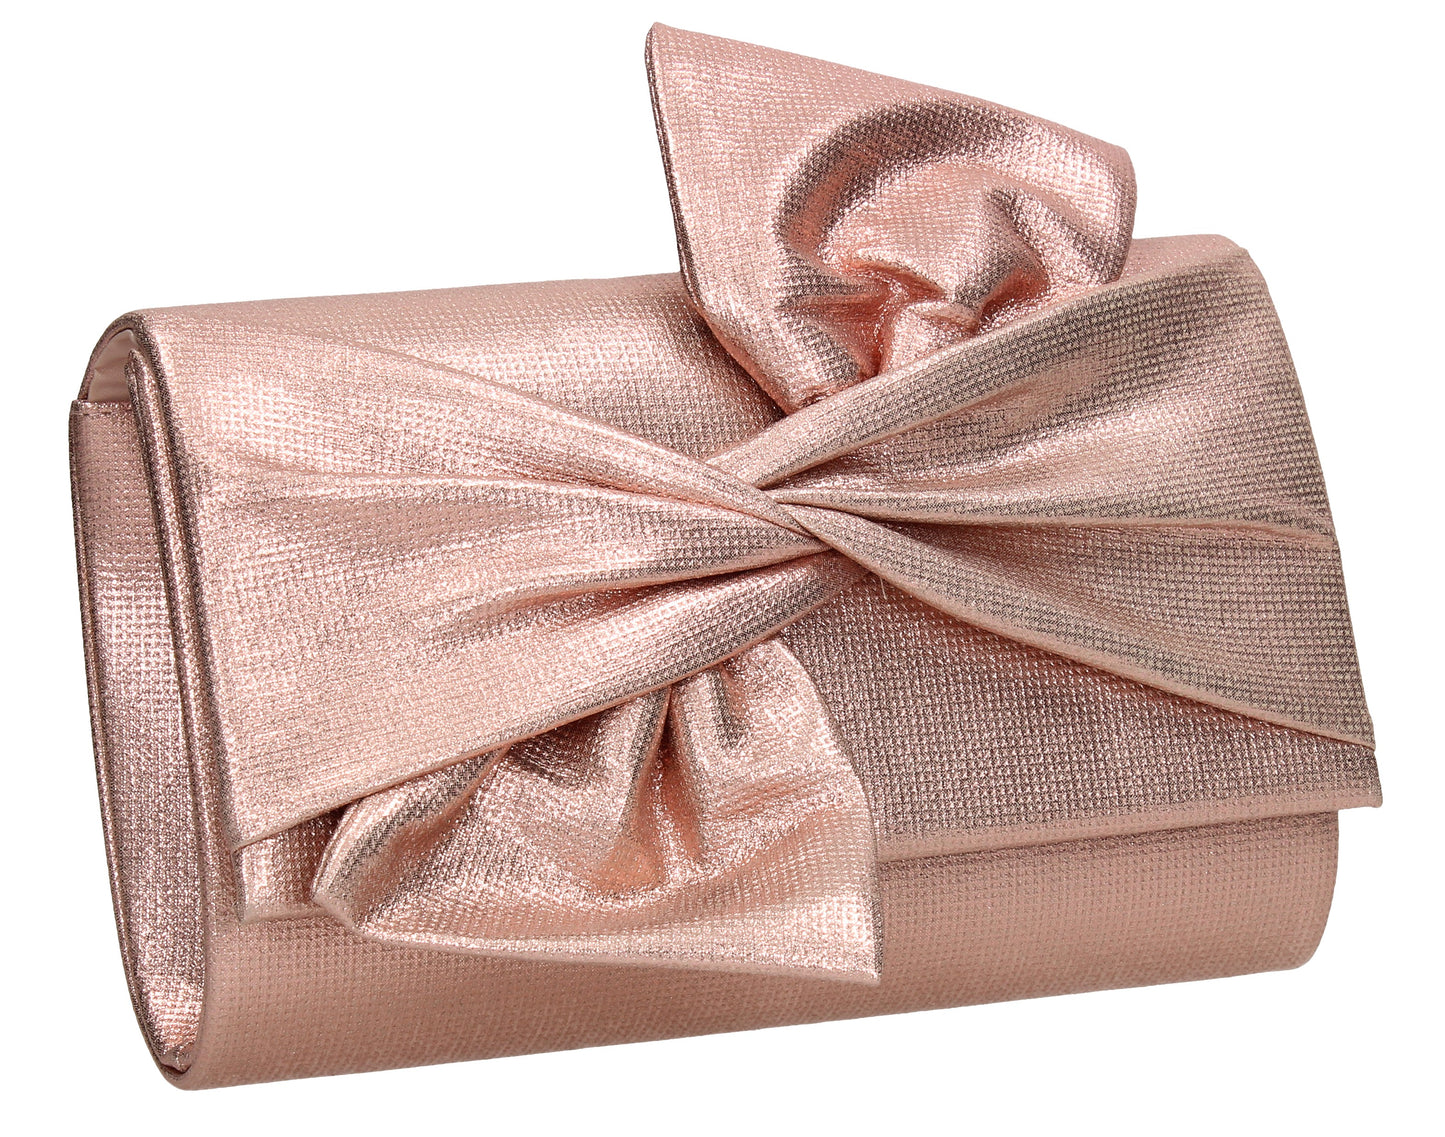 June Bow Style Clutch Bag Champagne